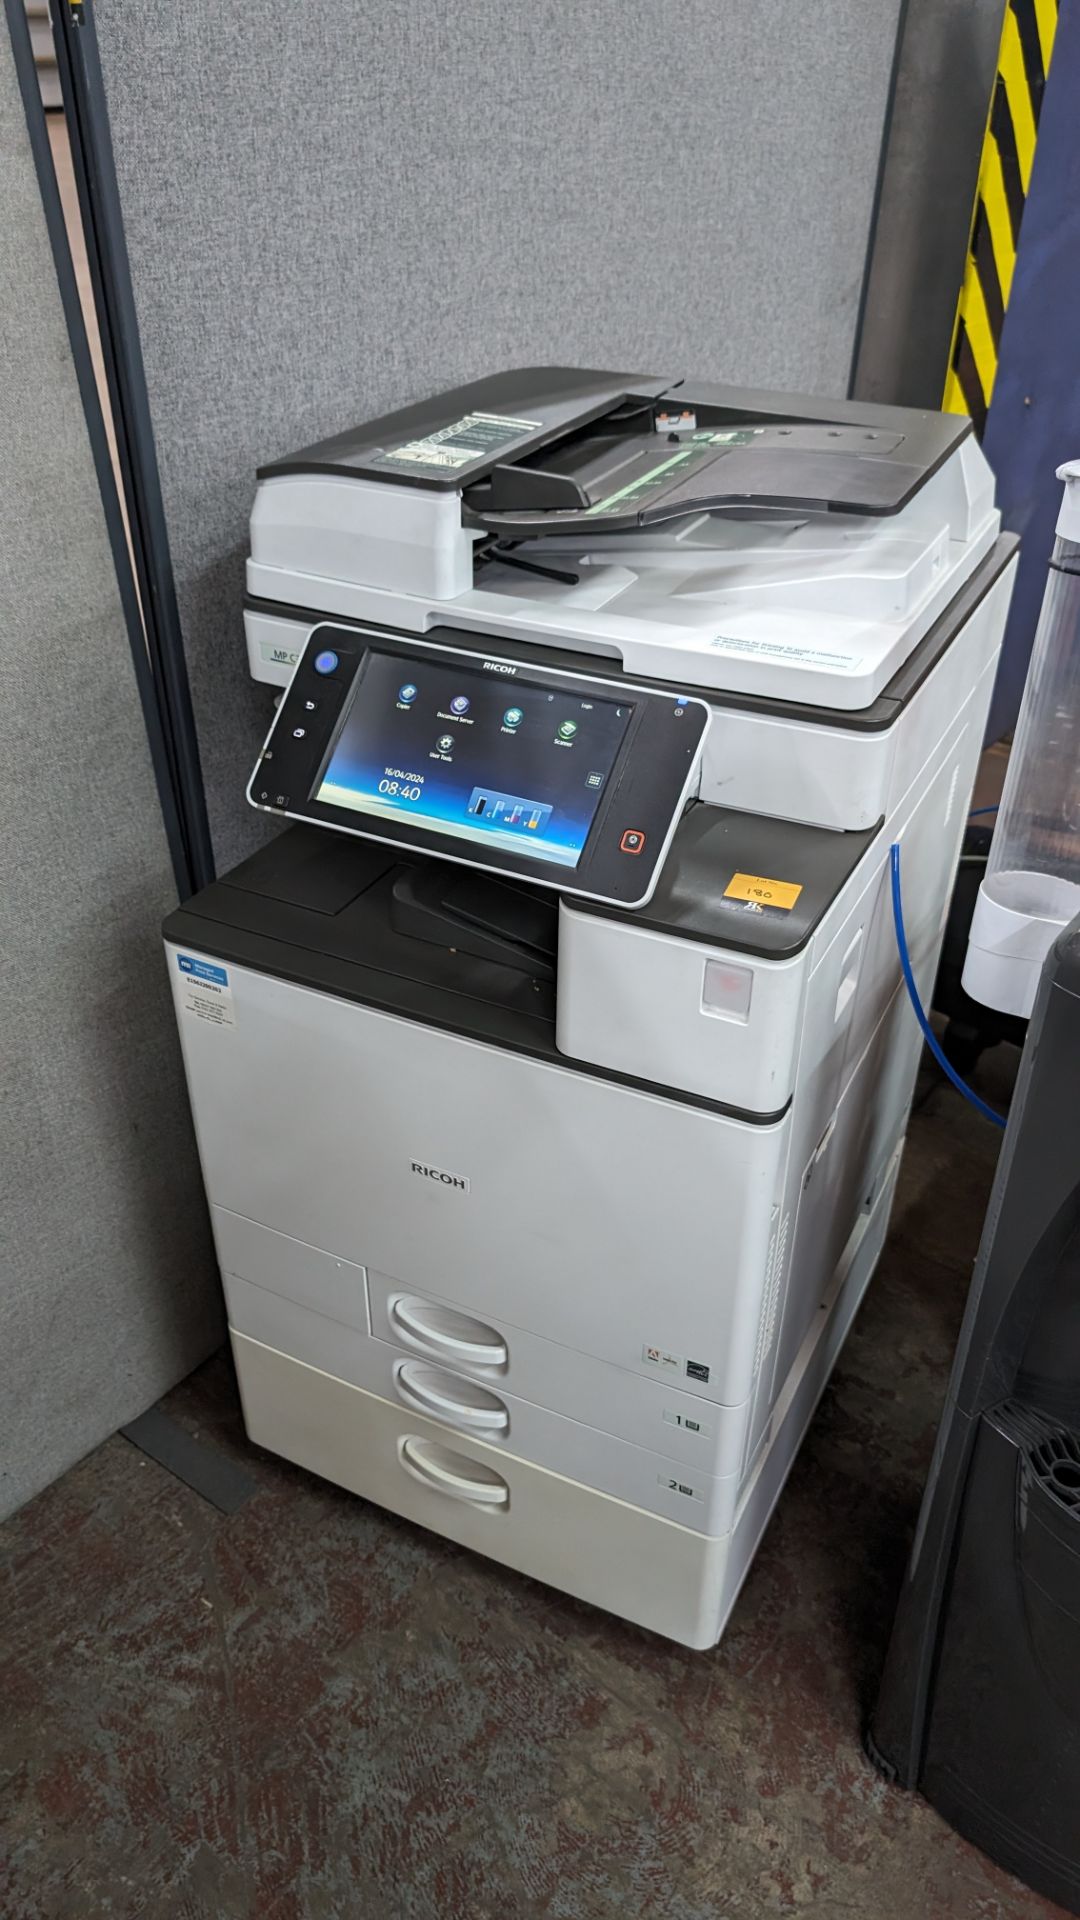 Ricoh MP C3003 floor standing copier with touchscreen controls, ADF, twin paper cassettes & more - Image 9 of 18